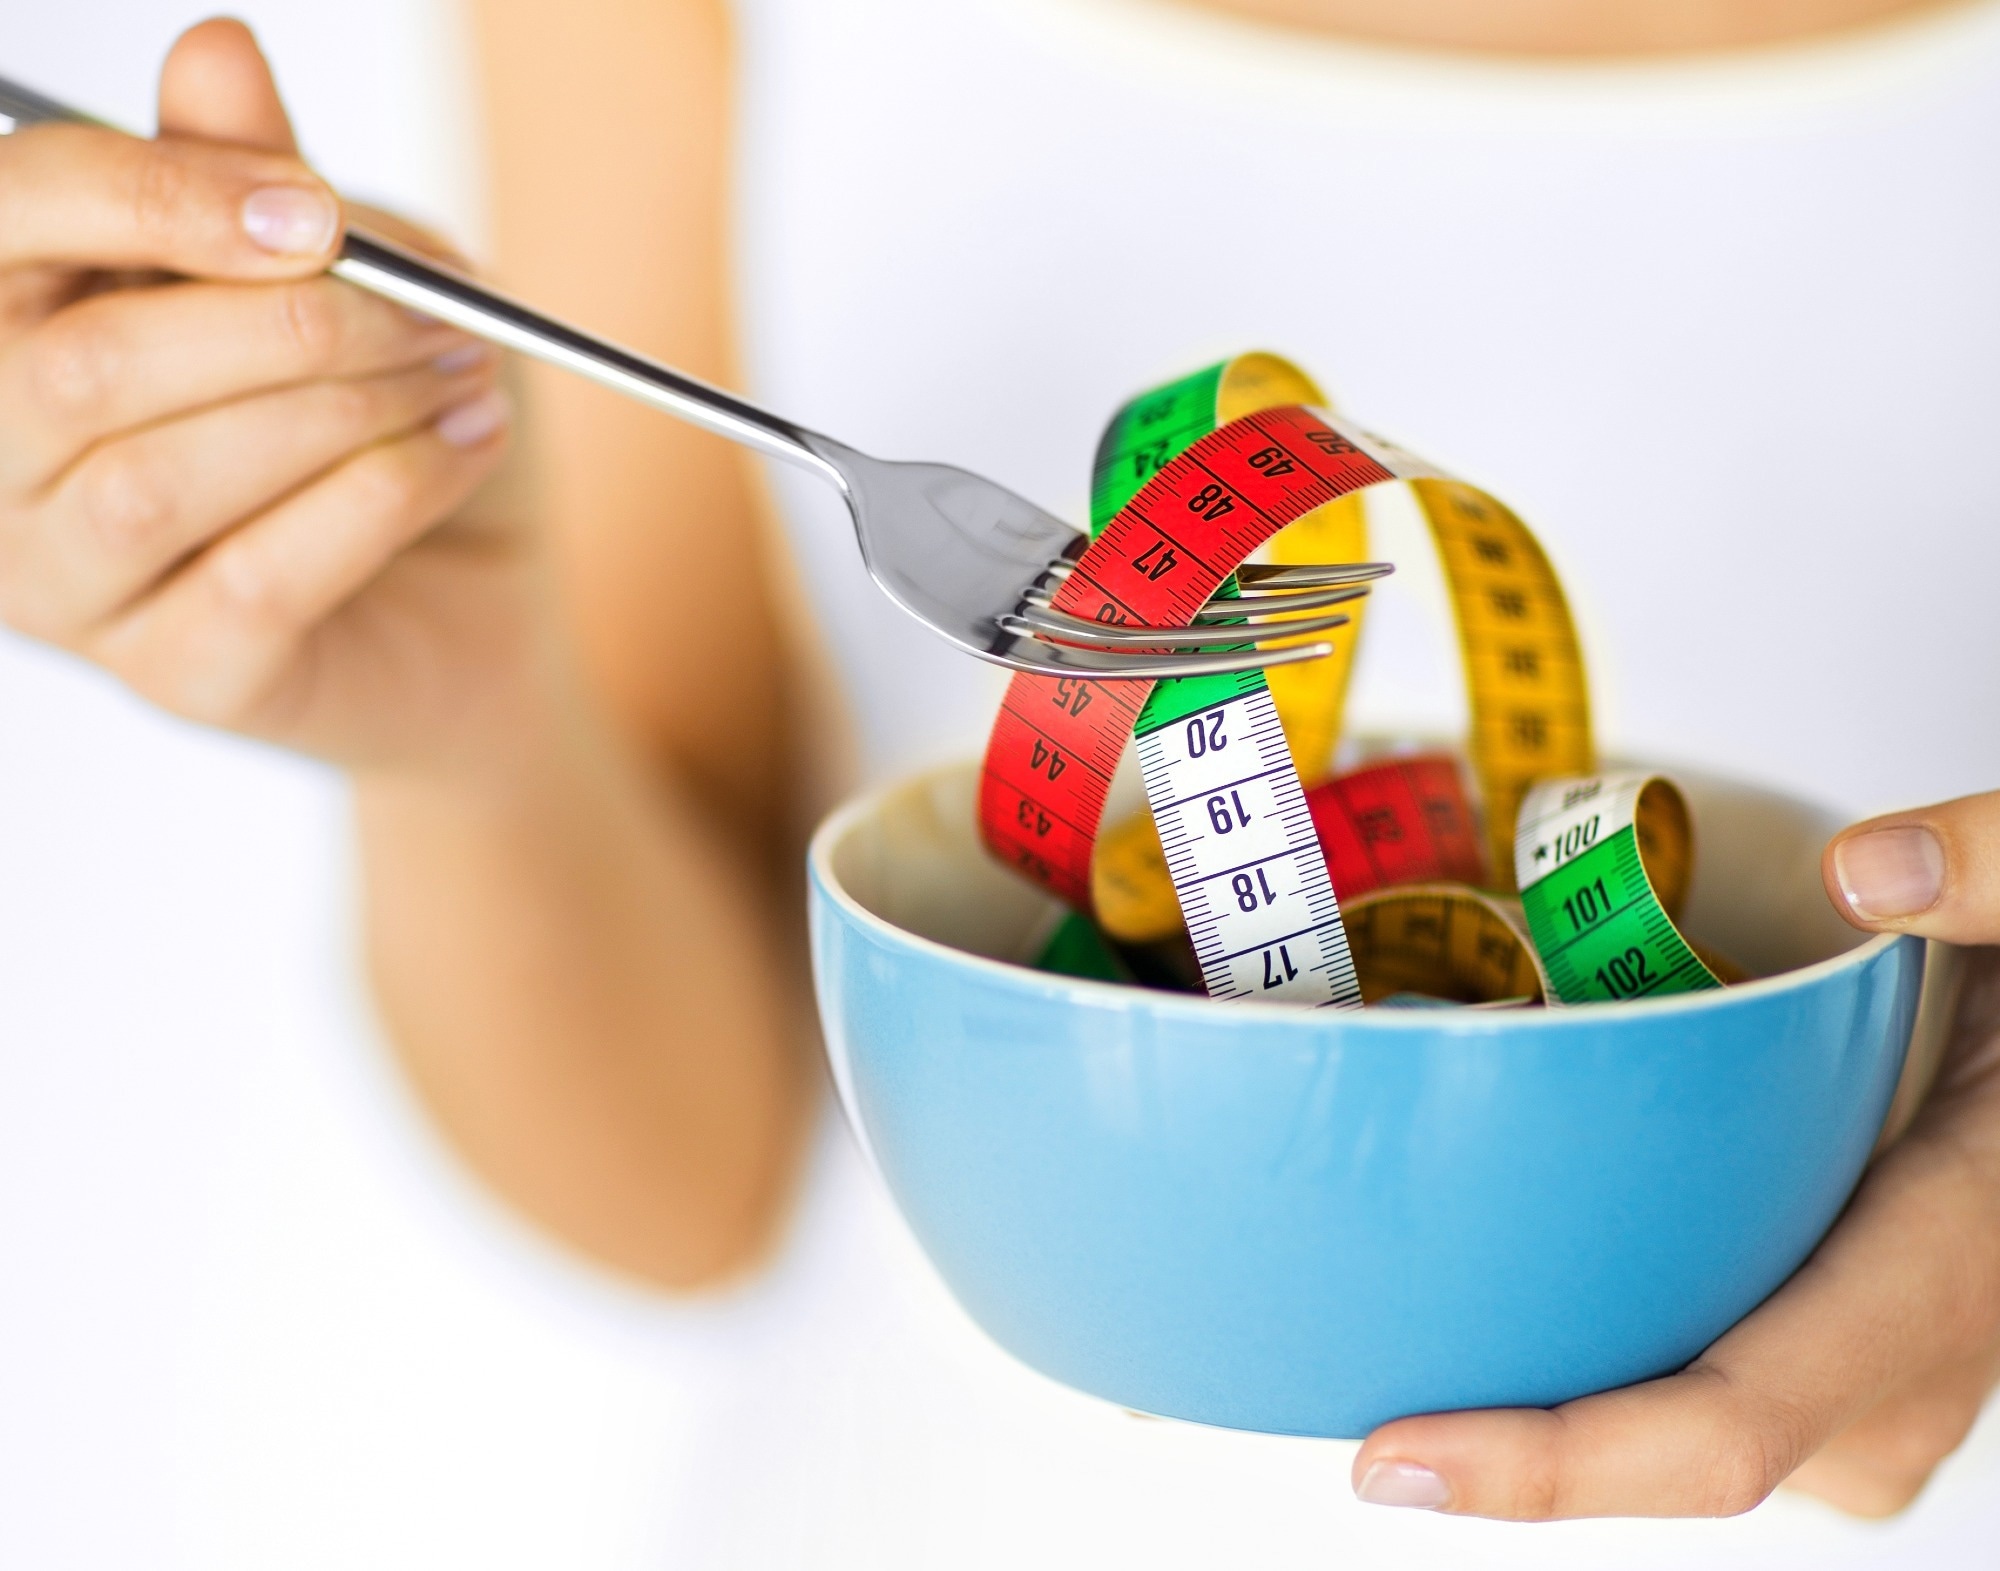 Study hints at potential risk between unhealthy low-fat diets and postmenopausal breast cancer